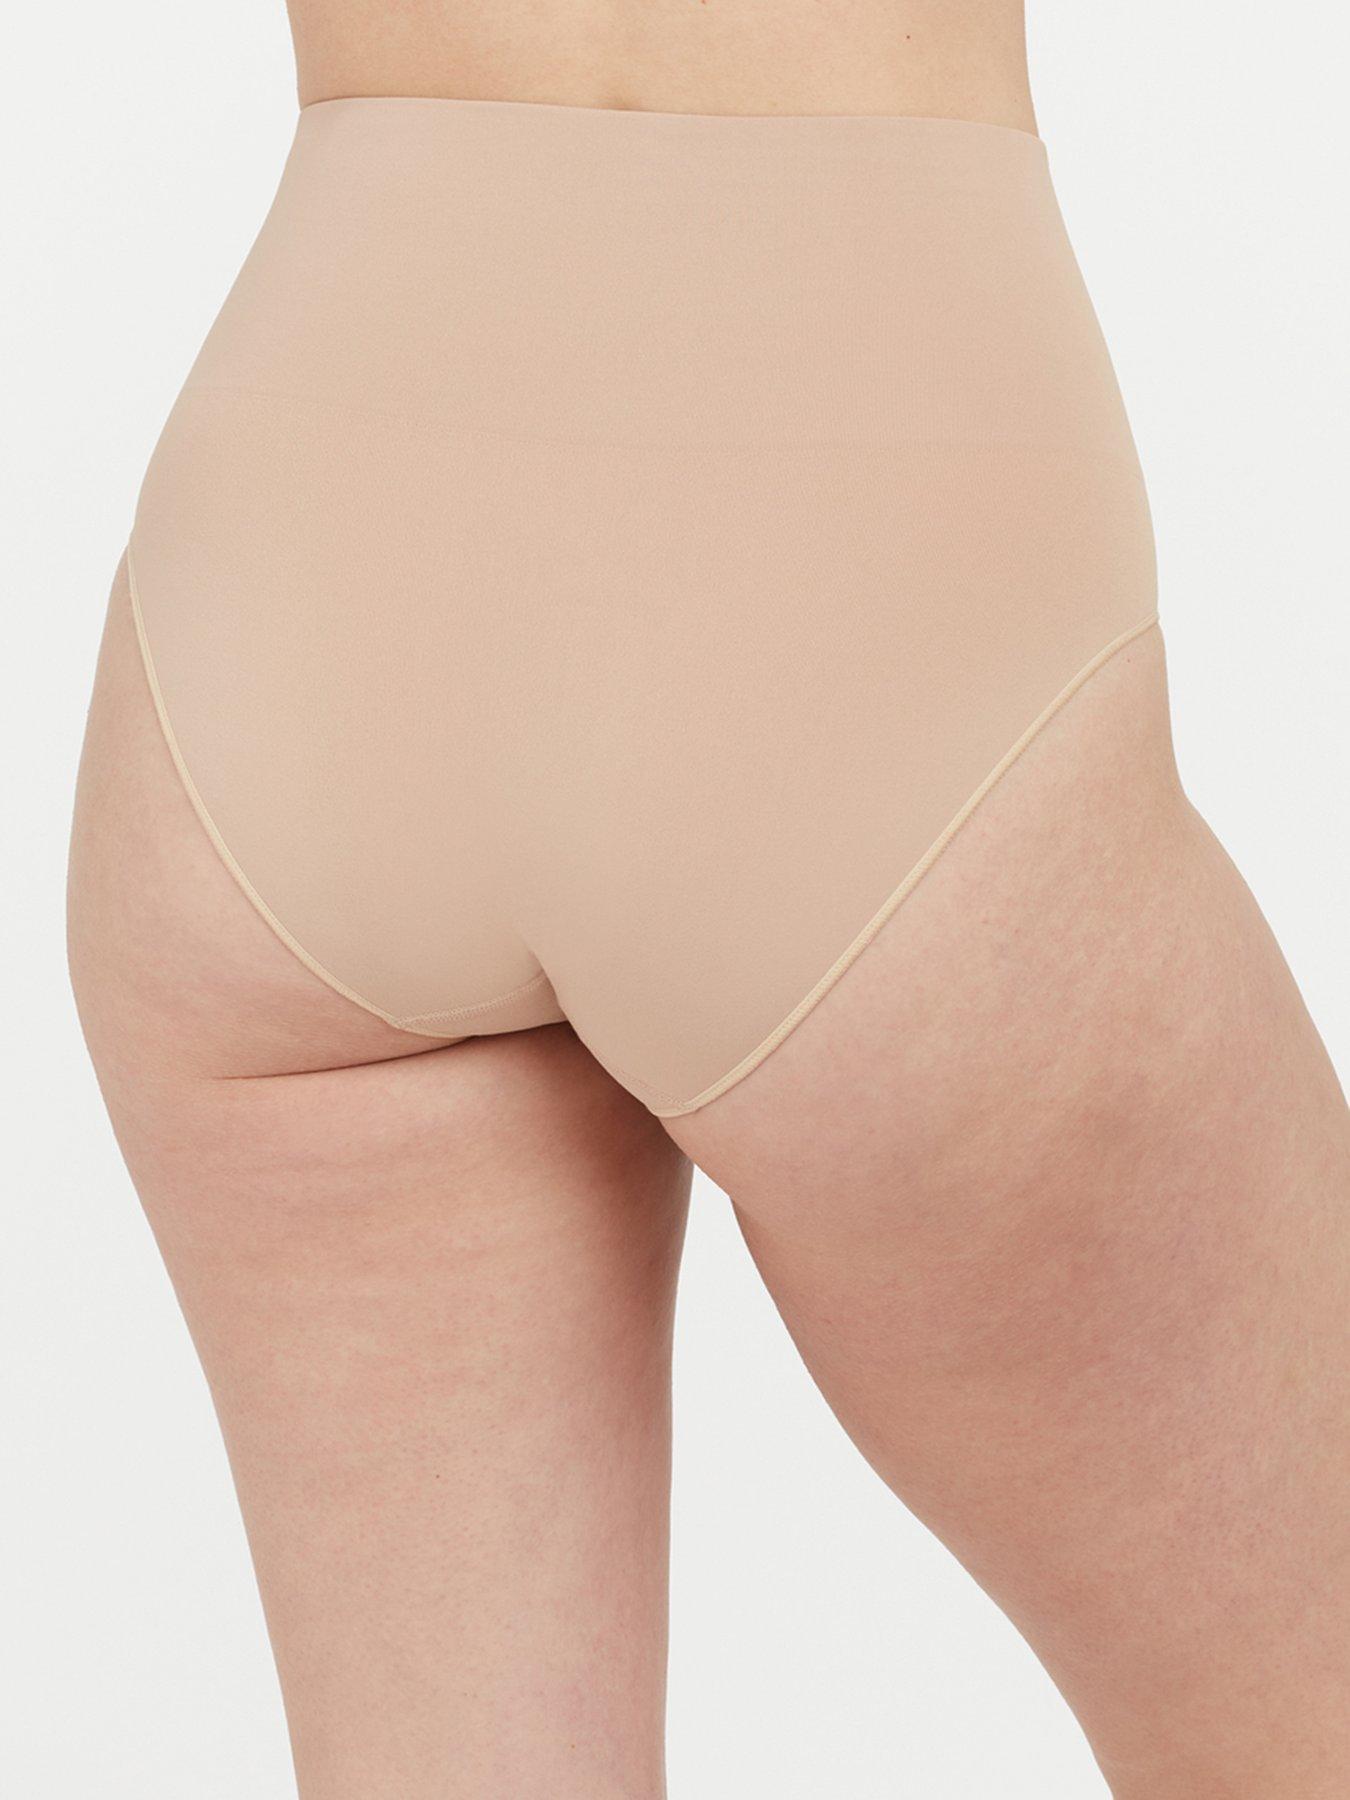 Spanx Everyday Brief - Oatmeal